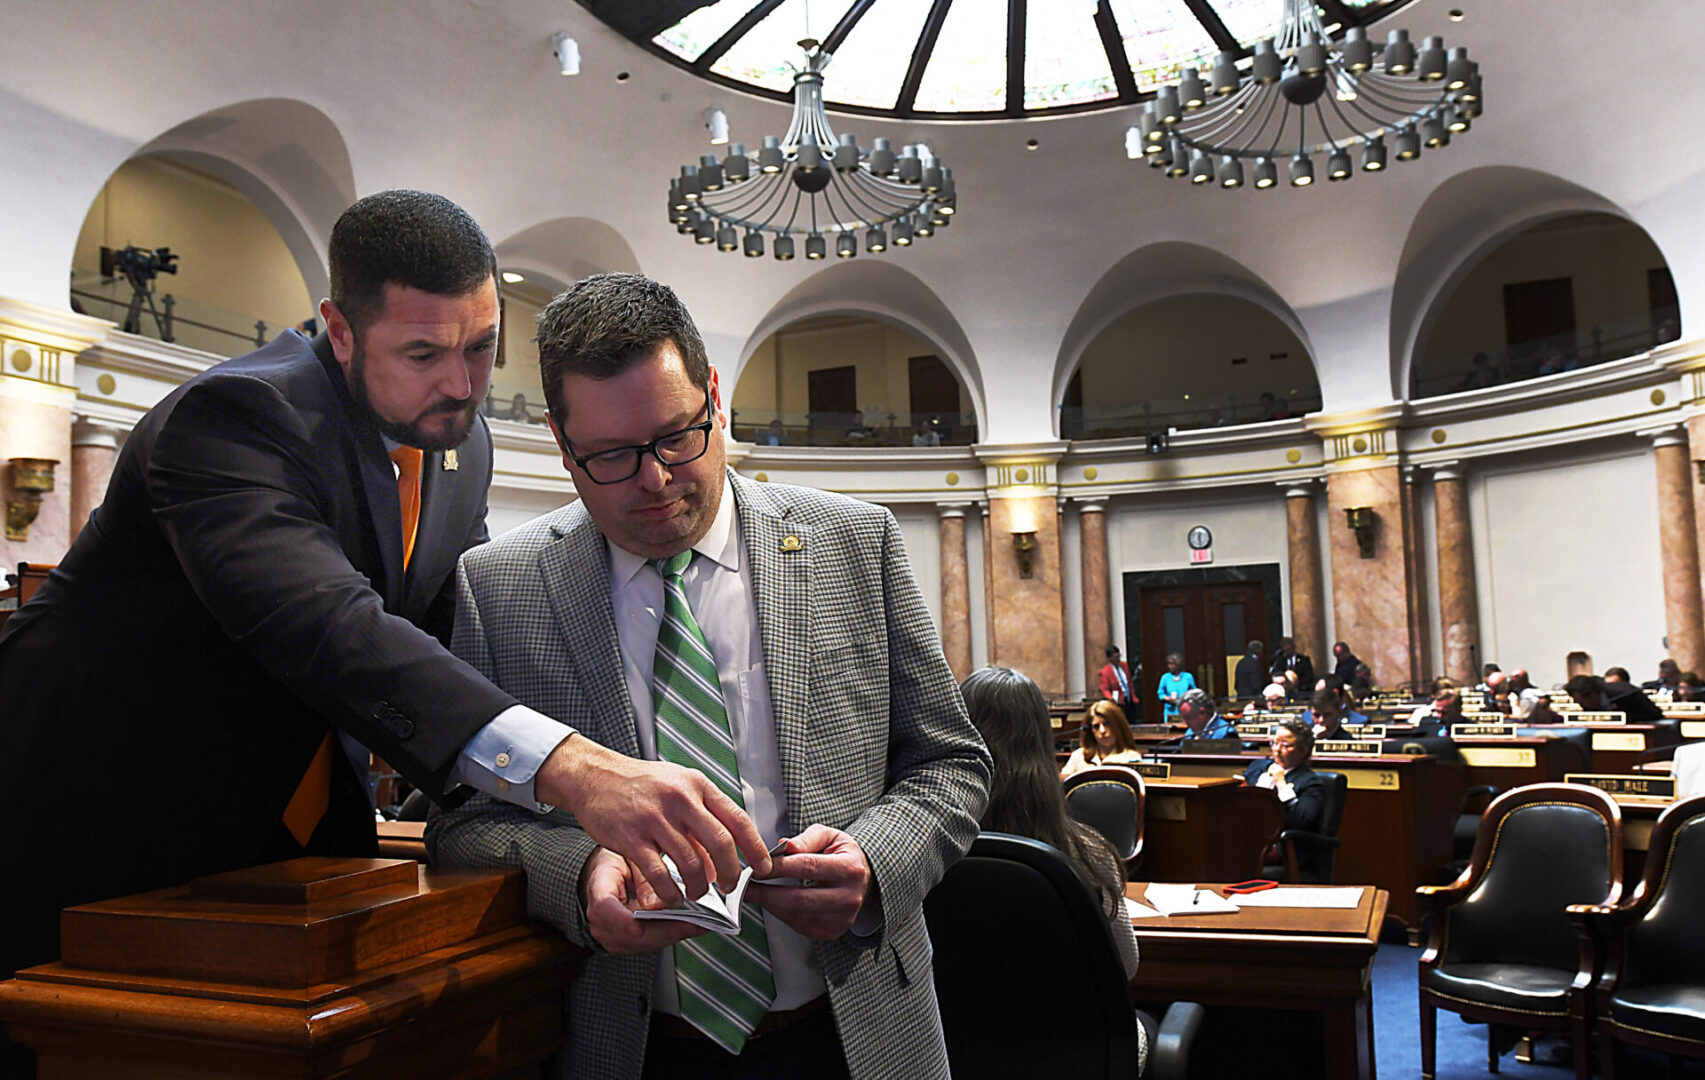 House Speaker Pro Tempore David Meade, R-Stanford, (left) confers with House Majority Floor Leader Steven Rudy, R-Paducah, about House rules during the March 28 proceedings on House Bill 5, an omnibus anti-crime bill. Gov. Andy Beshear vetoed the bill in early April. Photo: Kentucky Legislative Research Commission